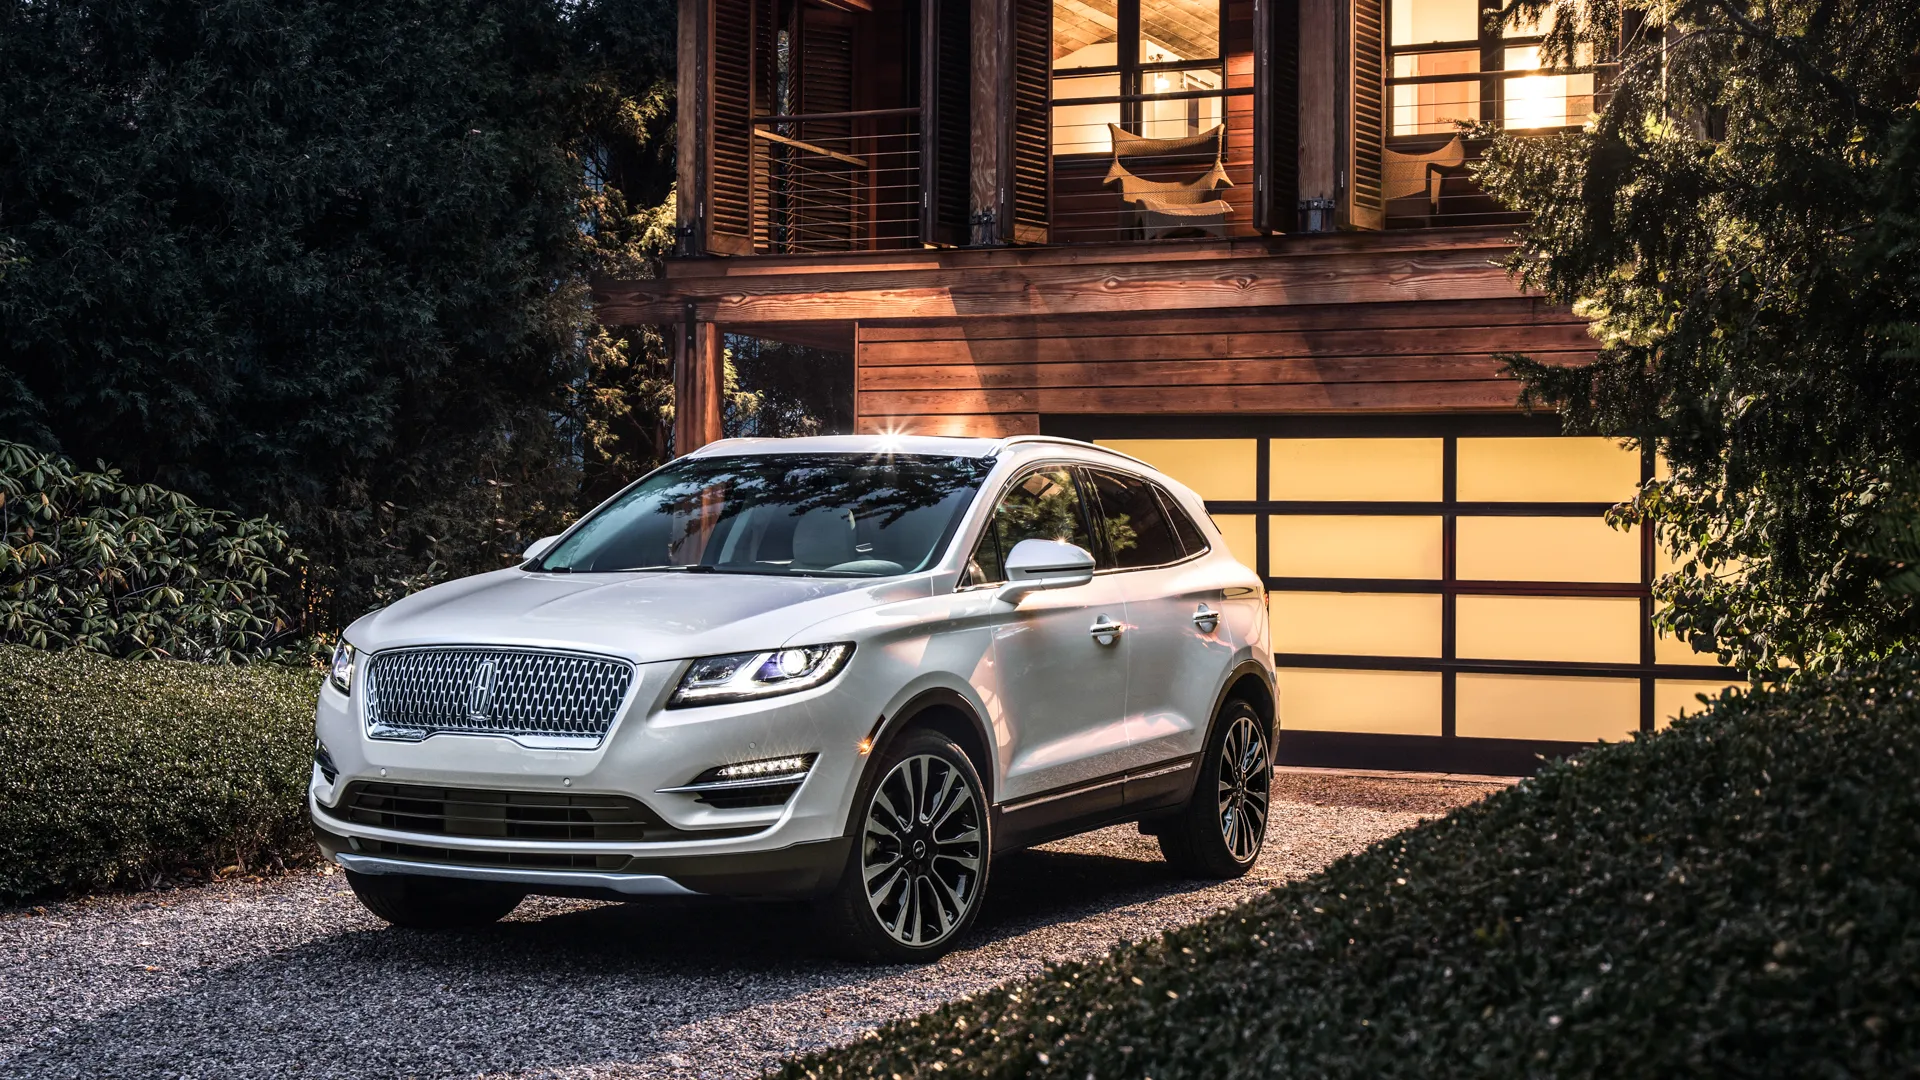 The new 2019 Lincoln MKC is poised to attract even more luxury SUV buyers, thanks to its commanding new design, driver-focused technologies like automatic emergency braking and pedestrian collision avoidance, and an effortless ownership experience that builds on Lincoln’s exclusive Pickup and Delivery service.